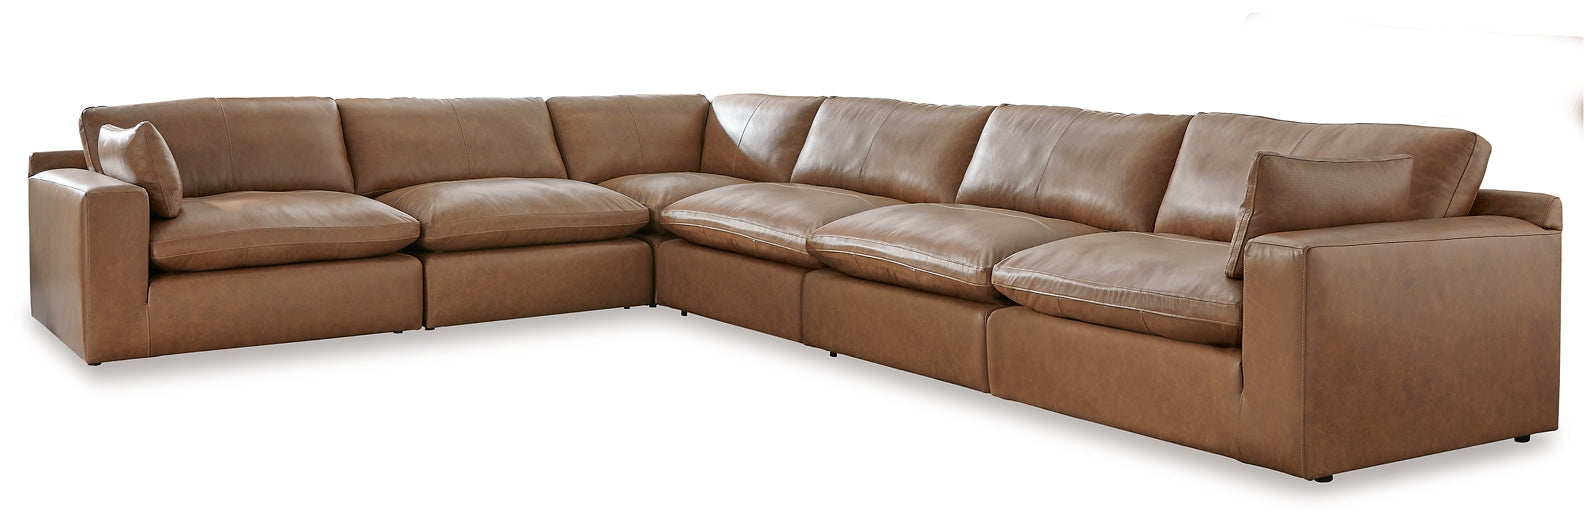 Emilia 6-Piece Sectional with Ottoman